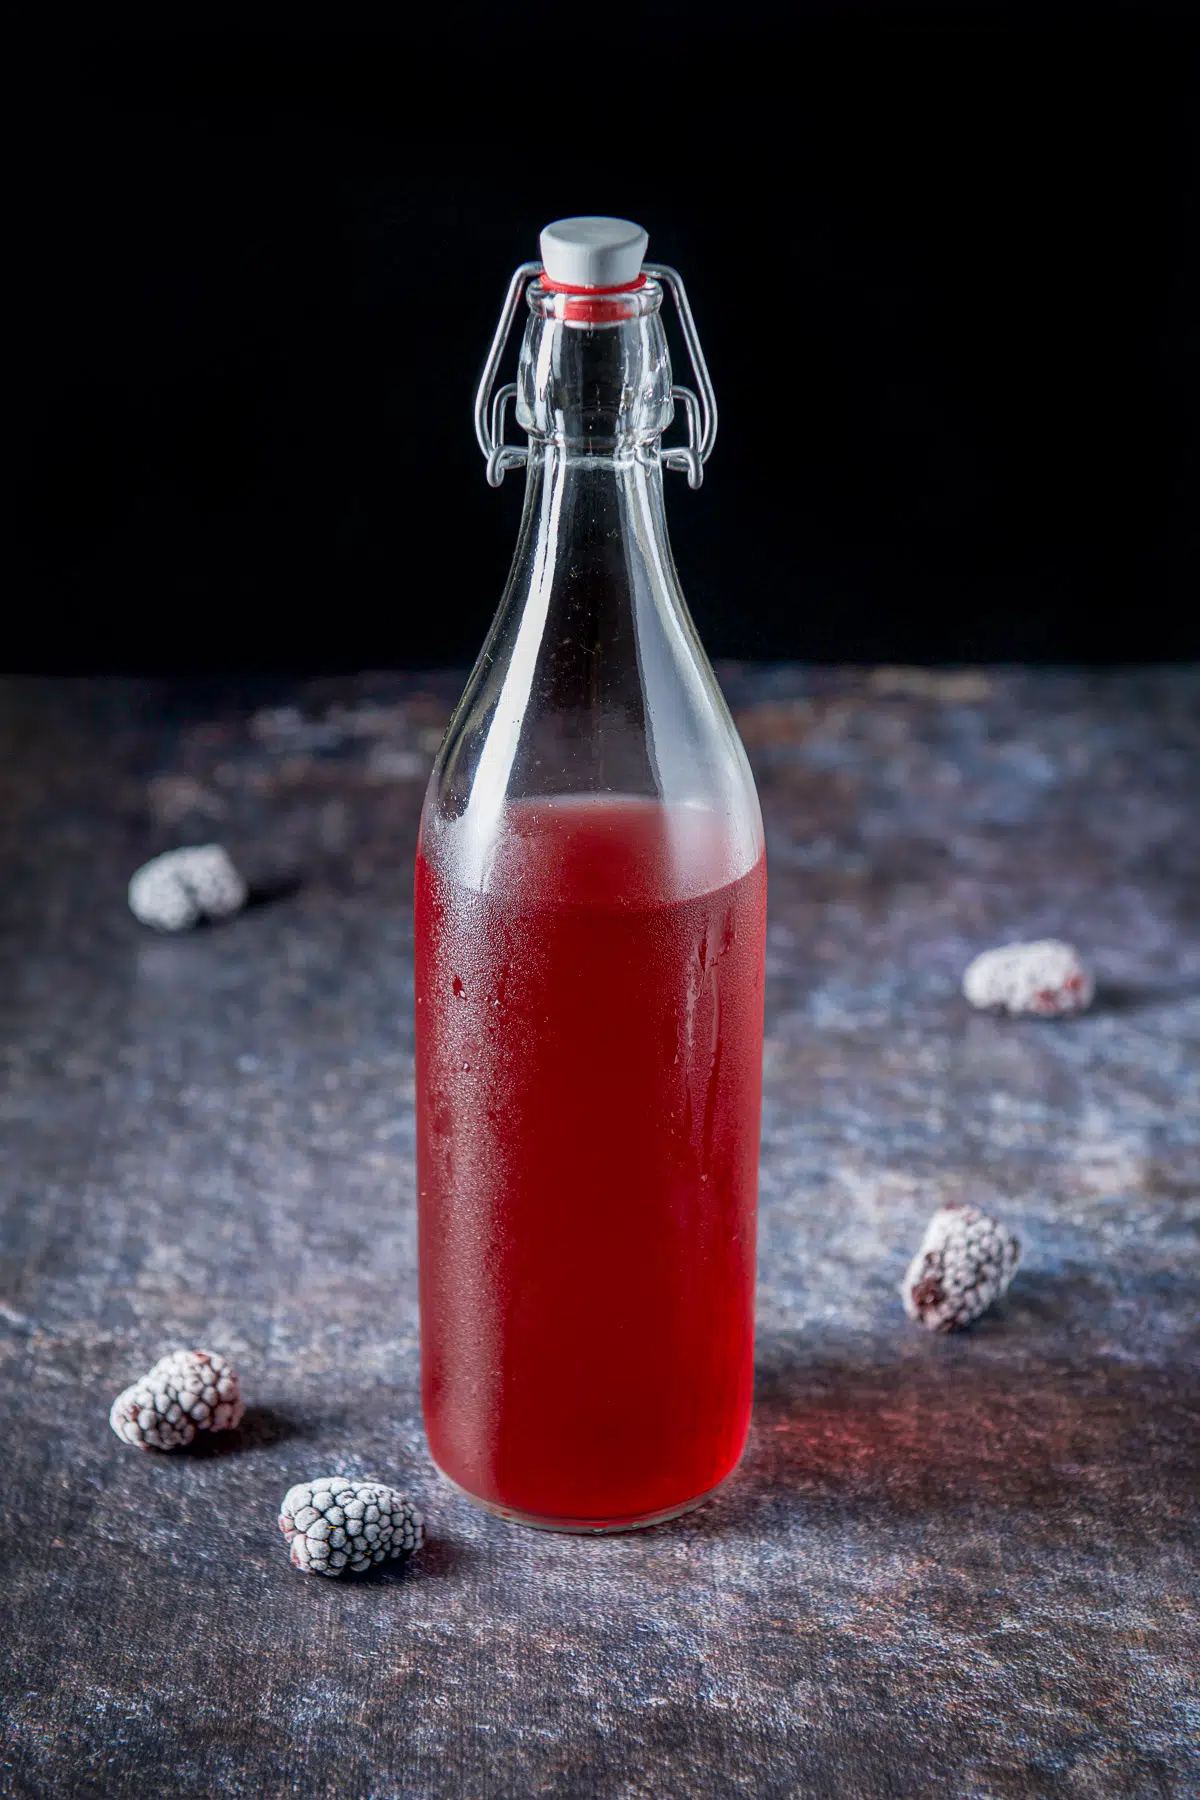 A table with frozen blackberries on it with a bottle of blackberry vodka